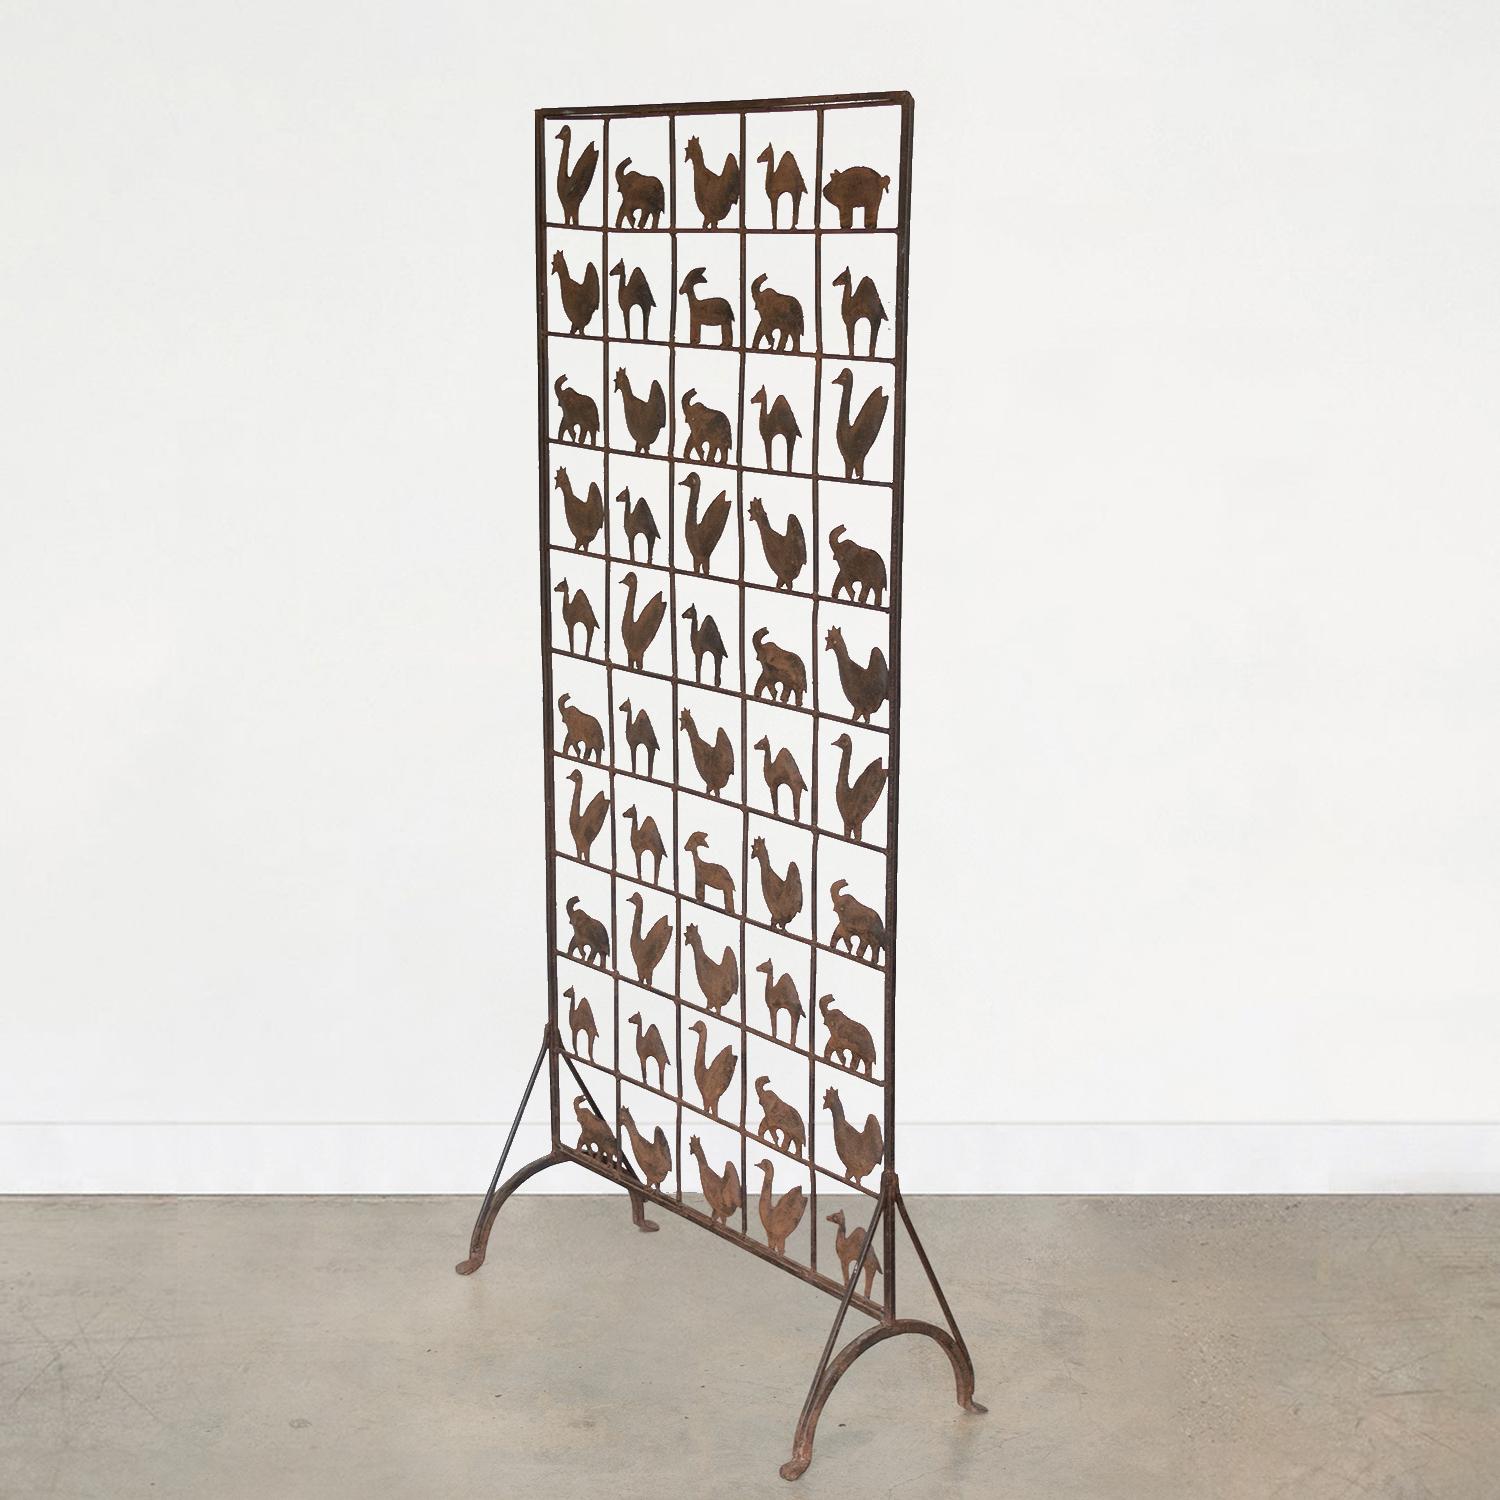 20th Century Wrought Iron Animal Wall Screen by Atelier Marolles, France